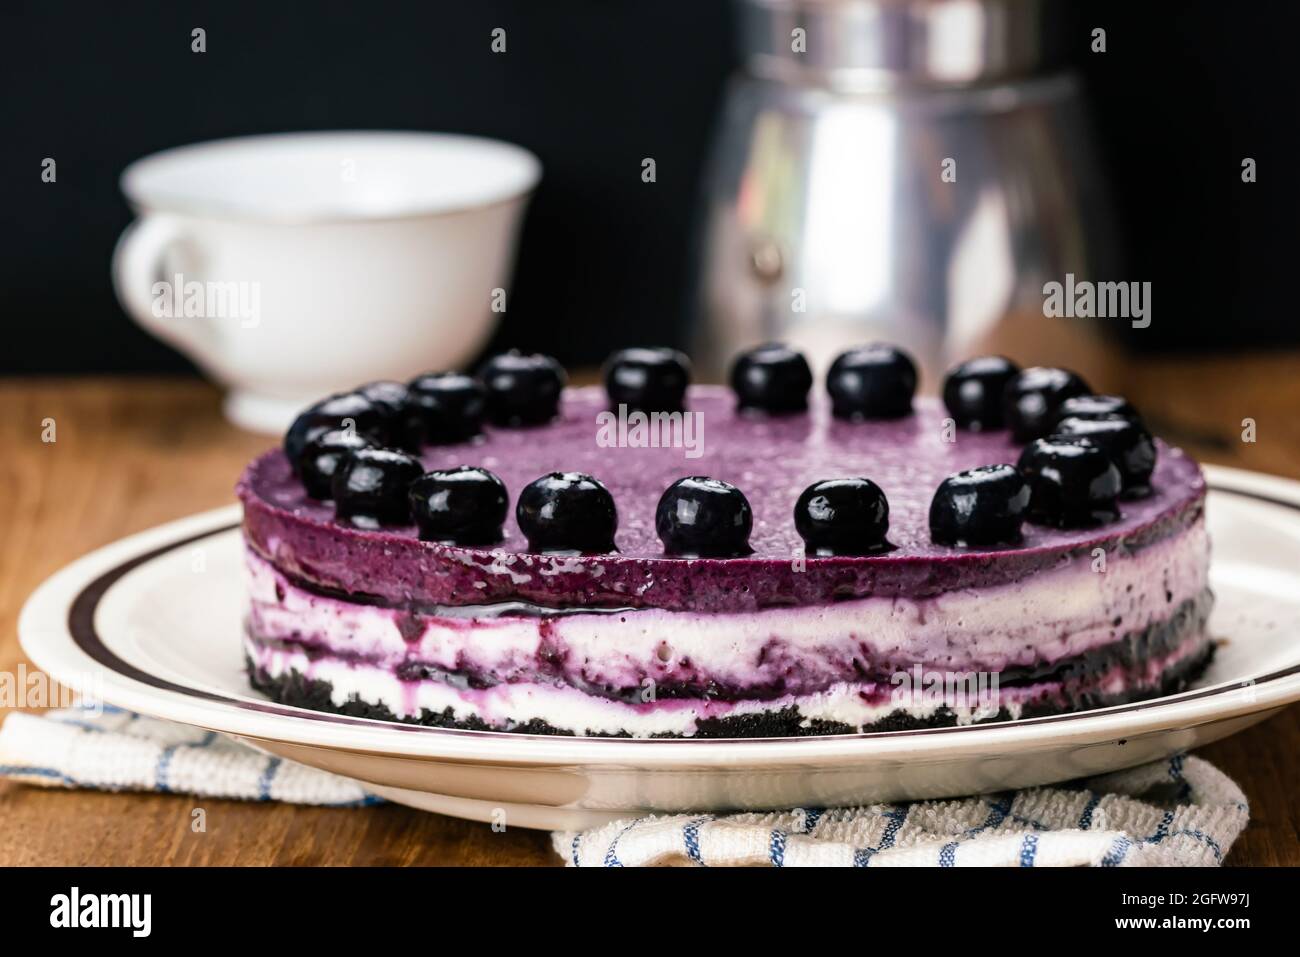 Side view of delicious homemade blueberry cheesecake garnished with preserved blueberry in brown ceramic dish with moka pot coffee maker and white cer Stock Photo